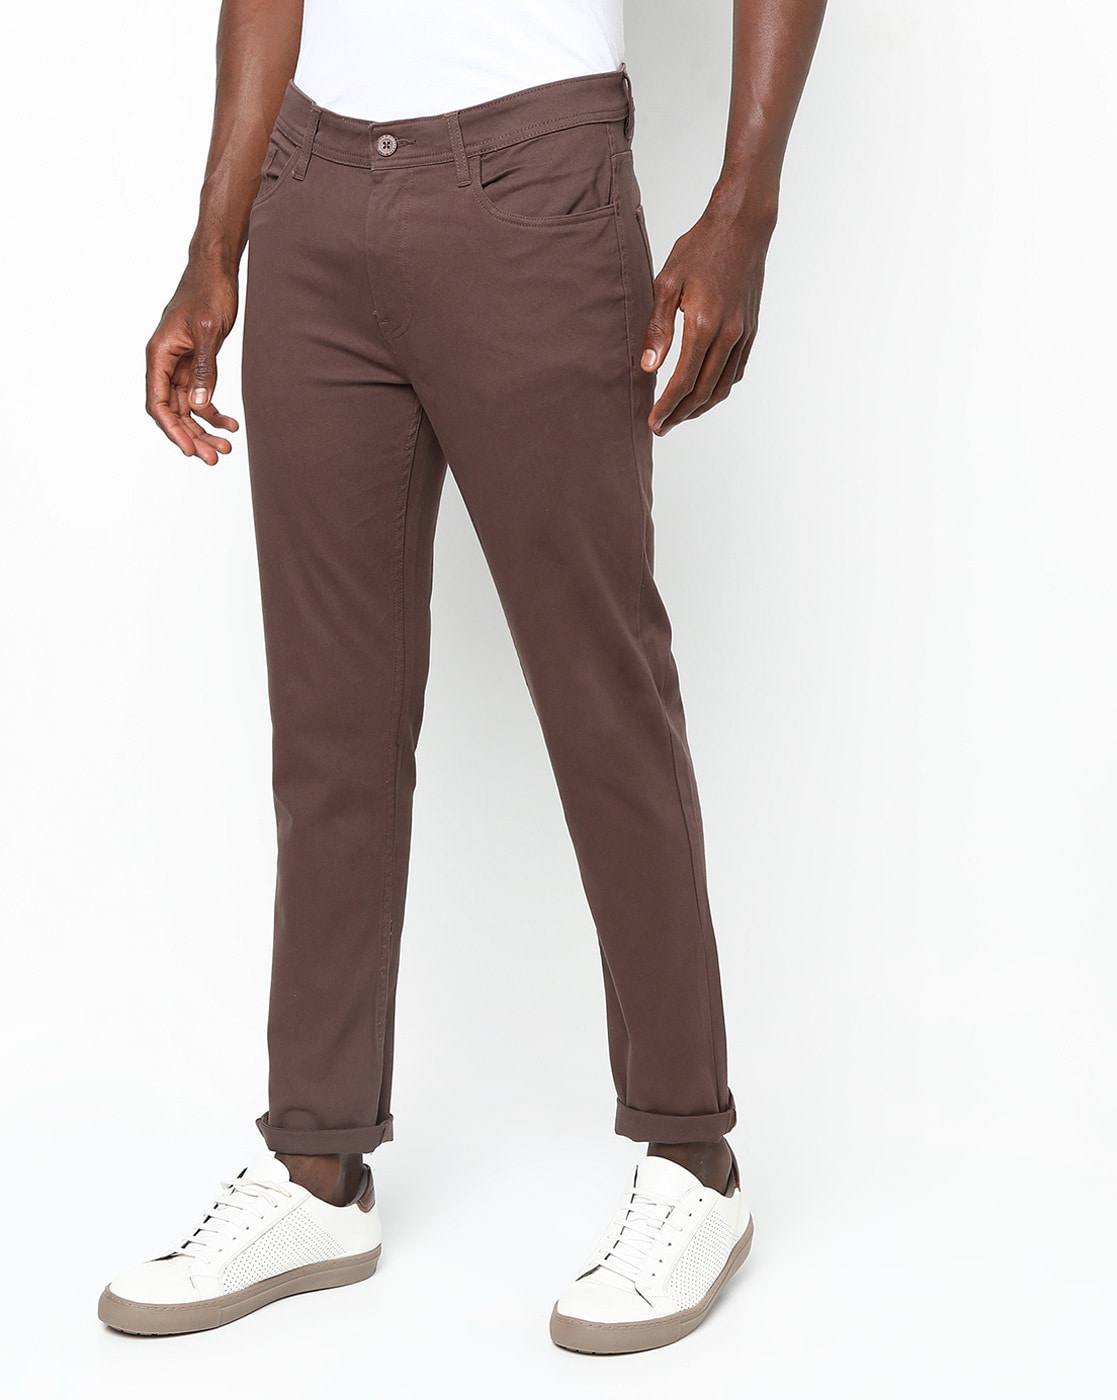 Shop Latest Cotton Brown Pants for Men Online in India